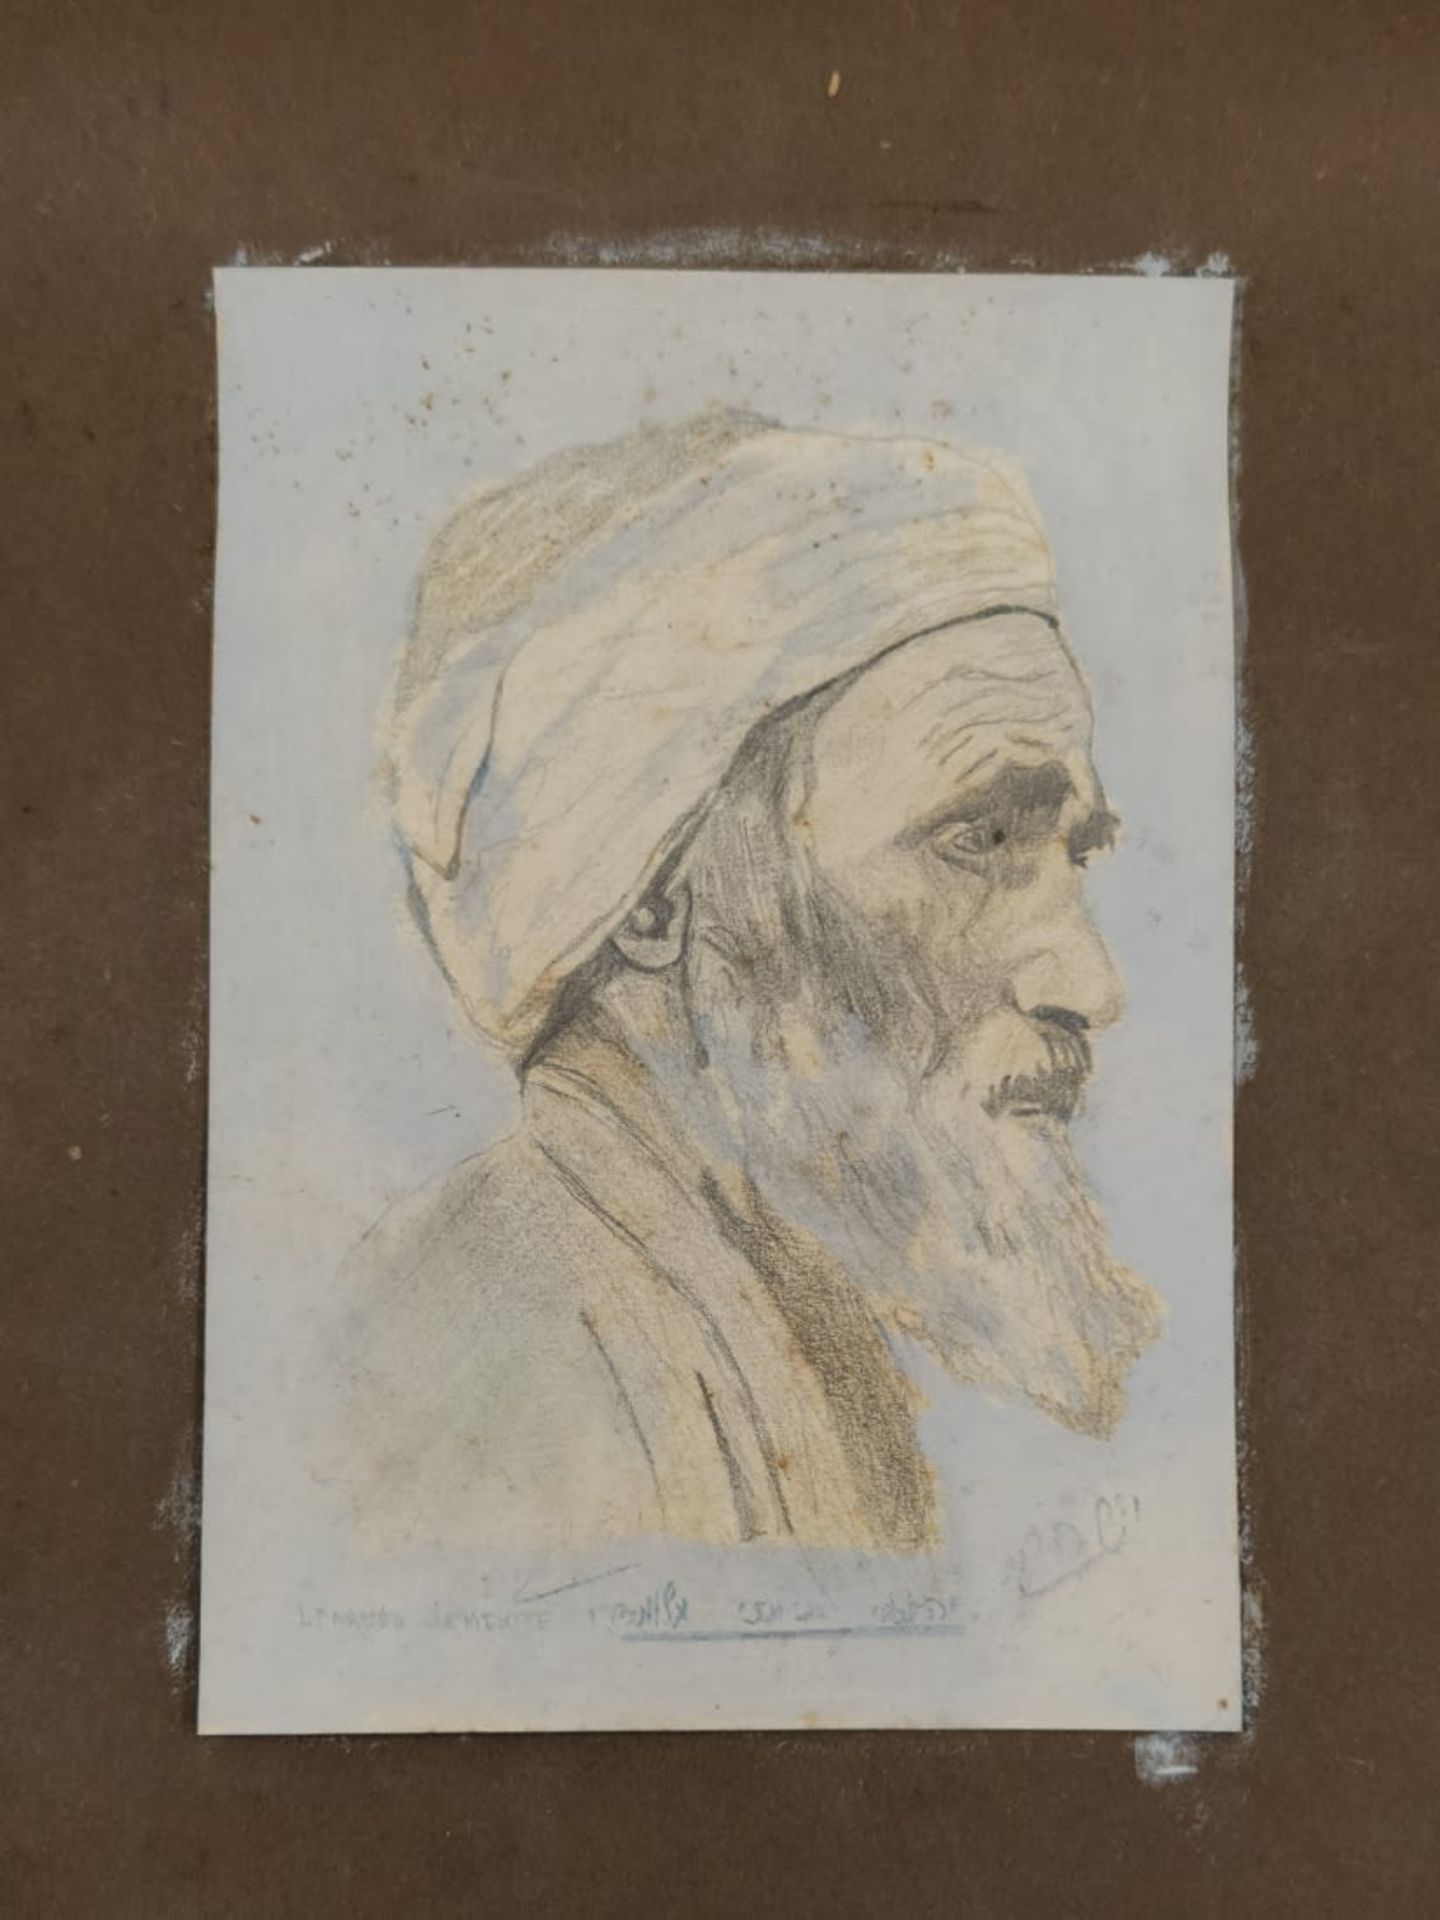 11 drawings of Jewish man, J. Shoham, pencil on paper, some stains, signed: J. Shoham pasted in an - Image 2 of 12